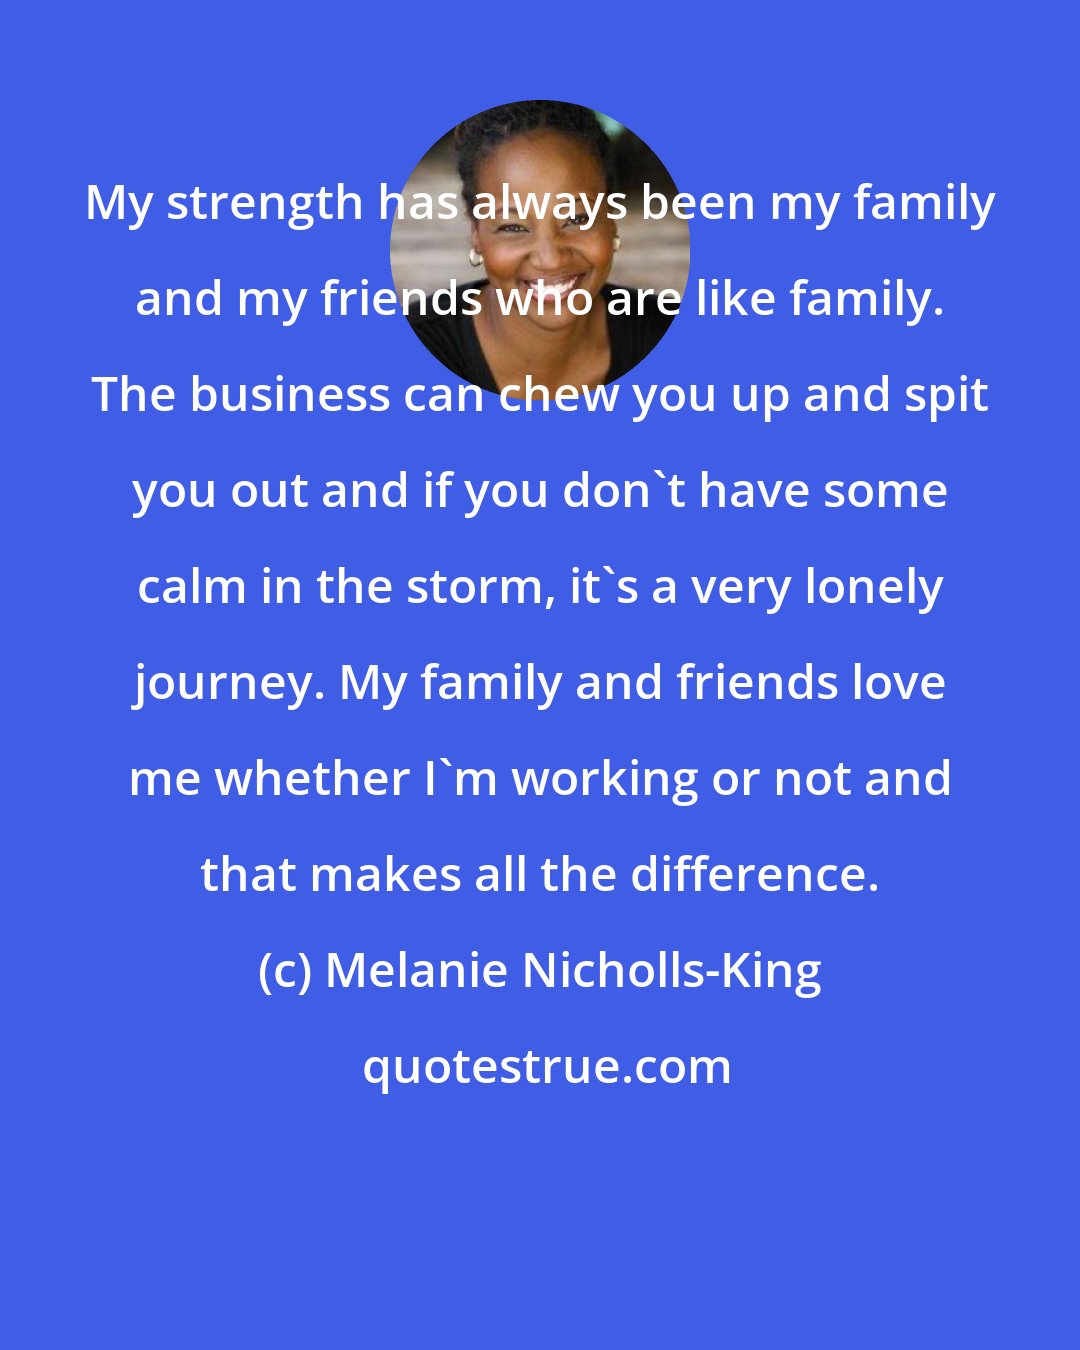 Melanie Nicholls-King: My strength has always been my family and my friends who are like family. The business can chew you up and spit you out and if you don't have some calm in the storm, it's a very lonely journey. My family and friends love me whether I'm working or not and that makes all the difference.